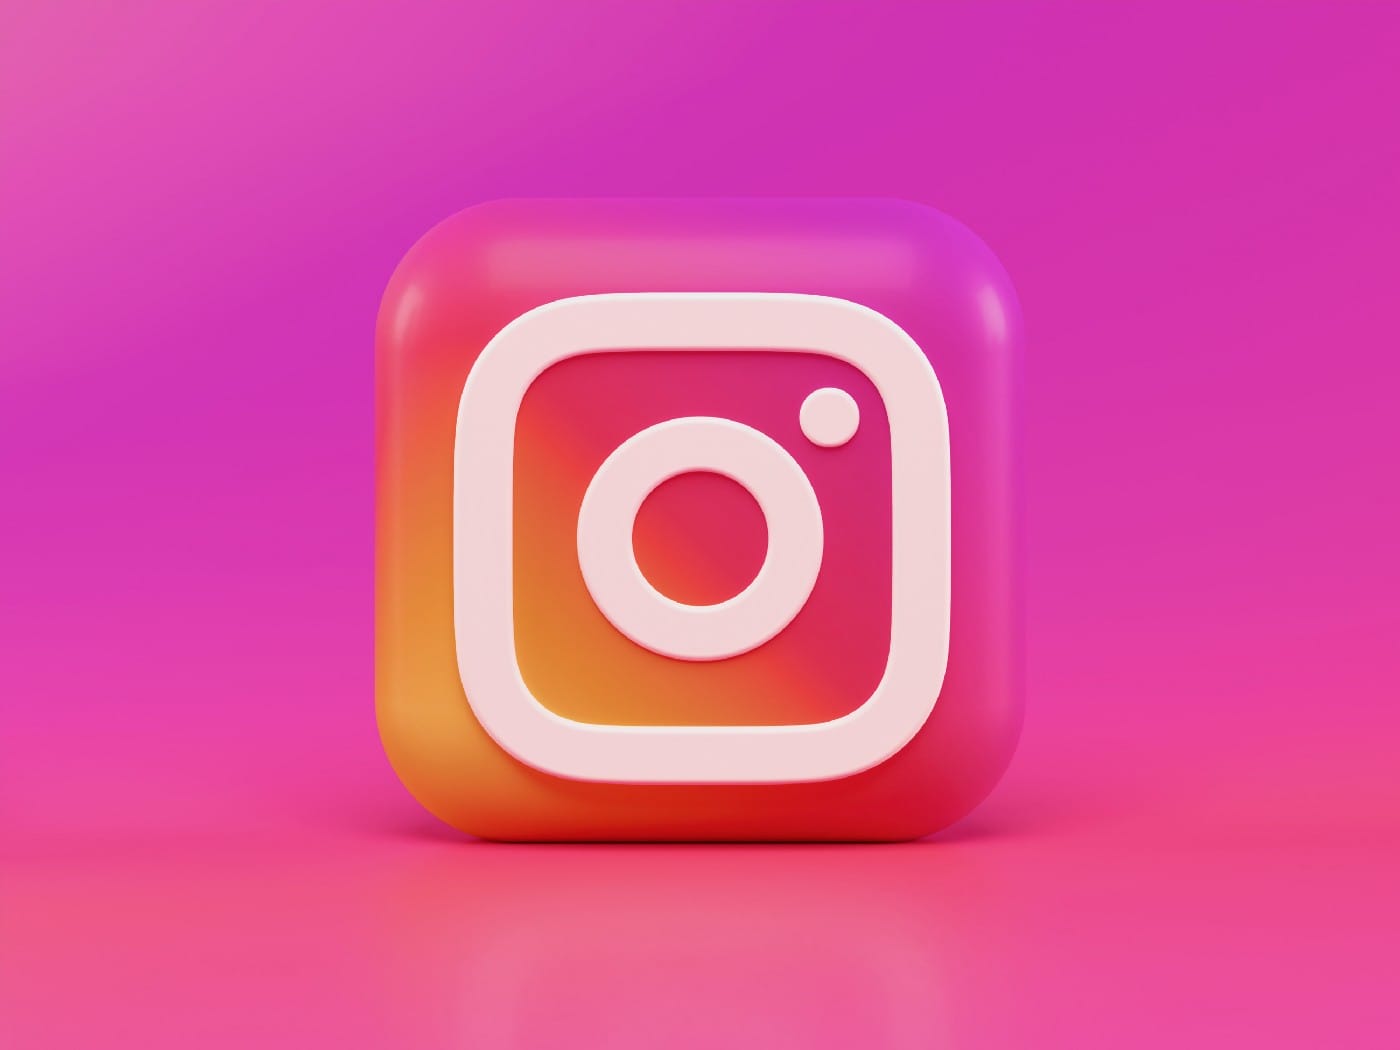  How to Get More Followers on Instagram With Bots?